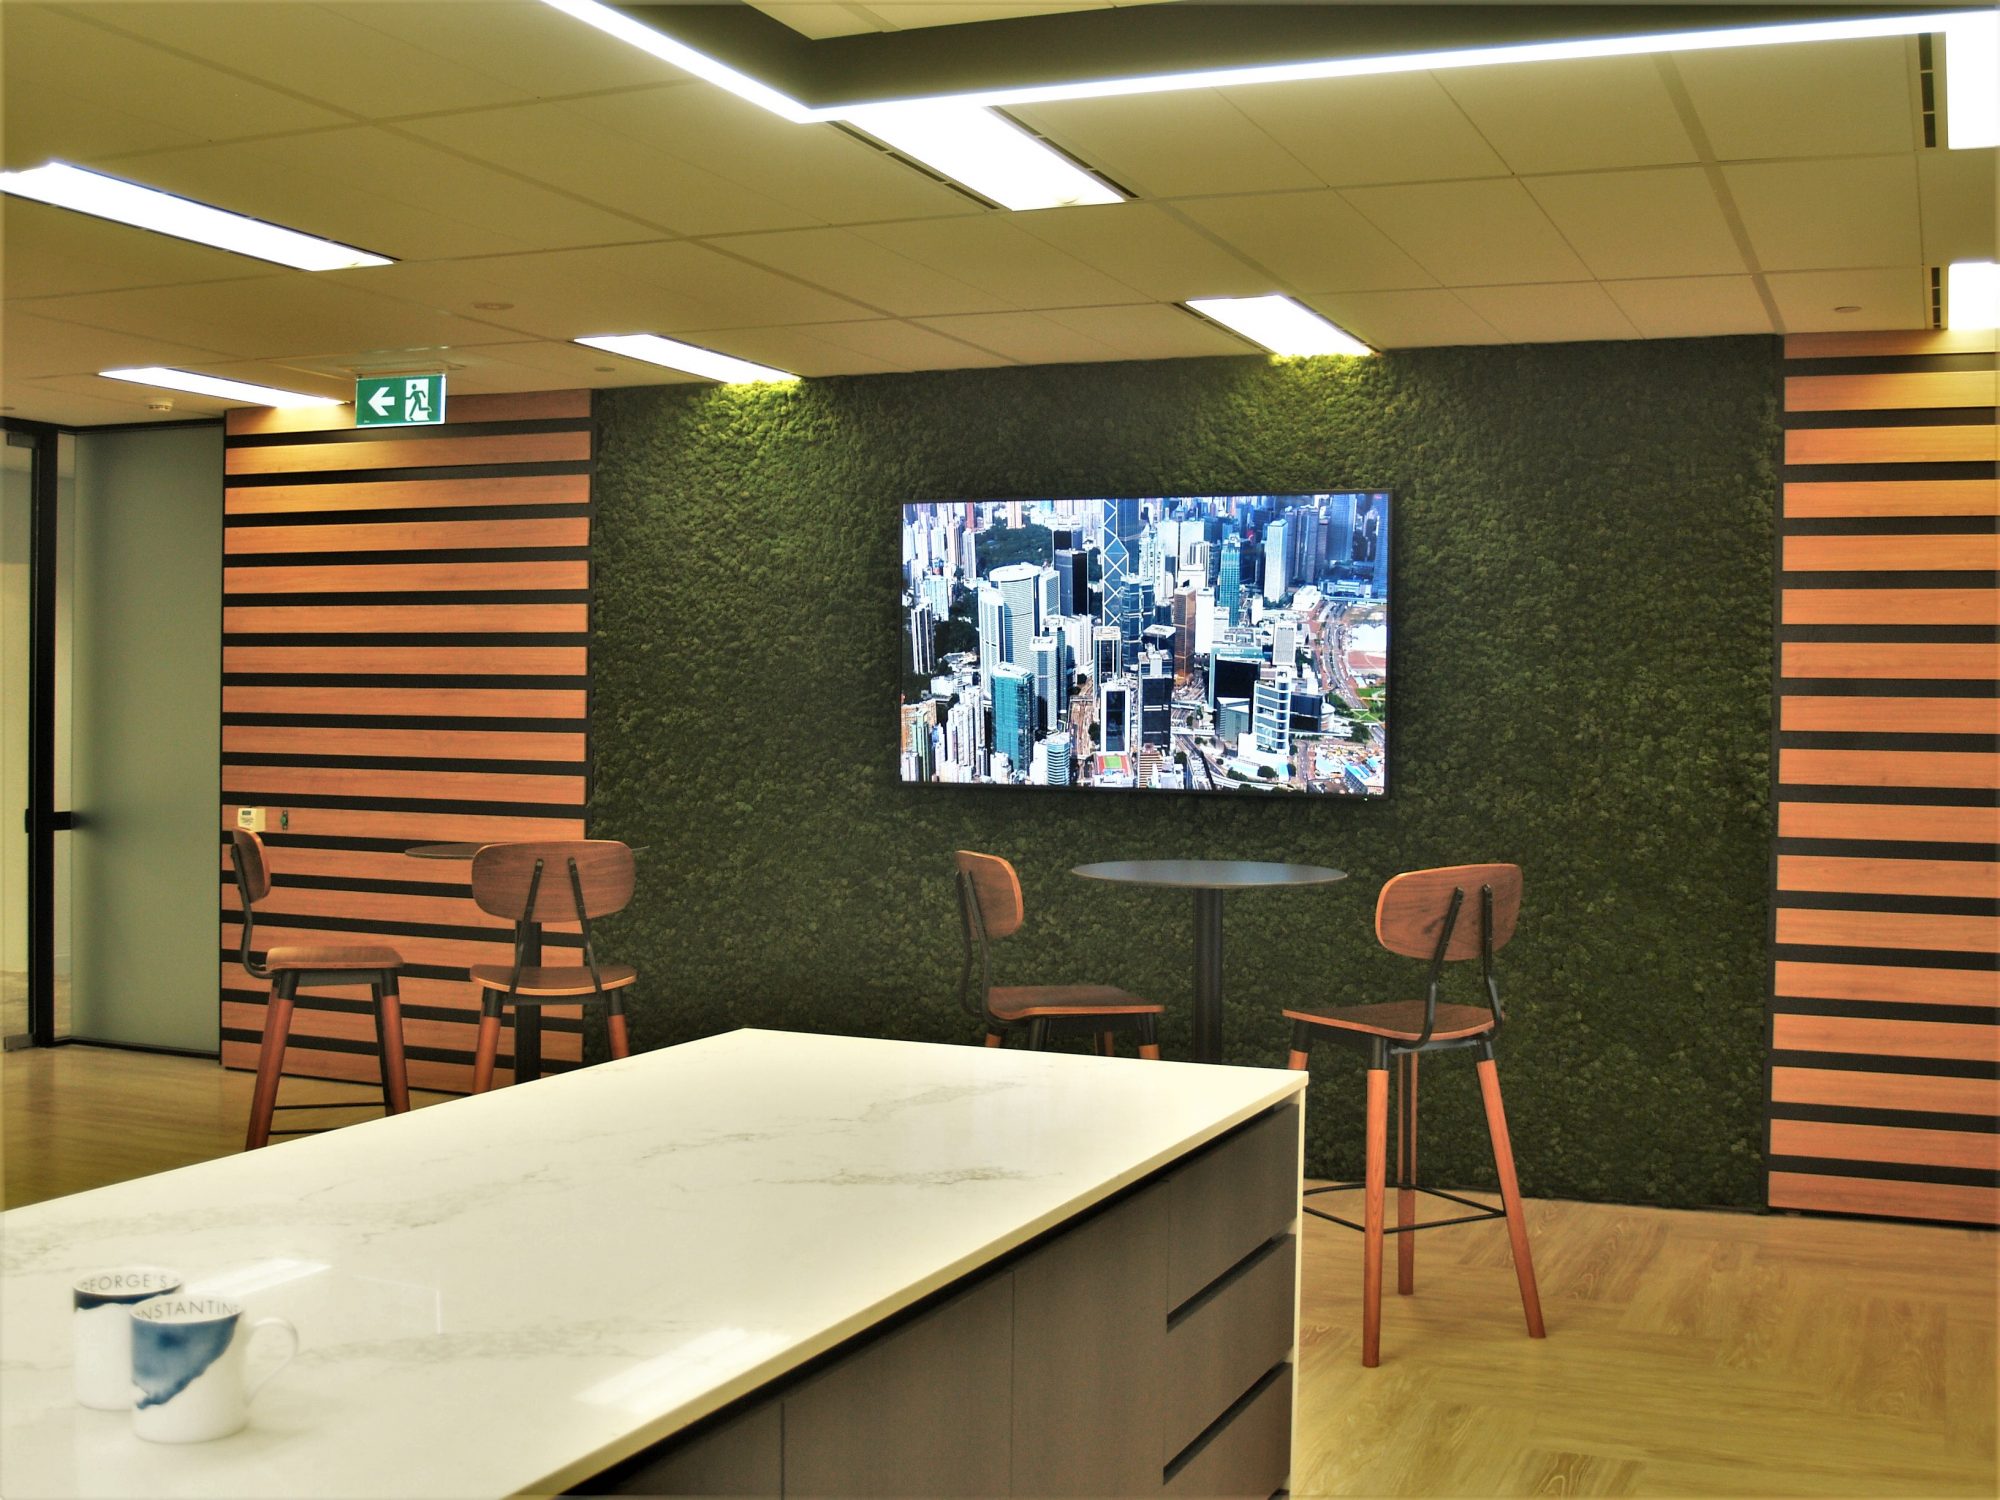 Moss Wall, Green Wall, indoor plant hire, office plants, office plant hire, green design,